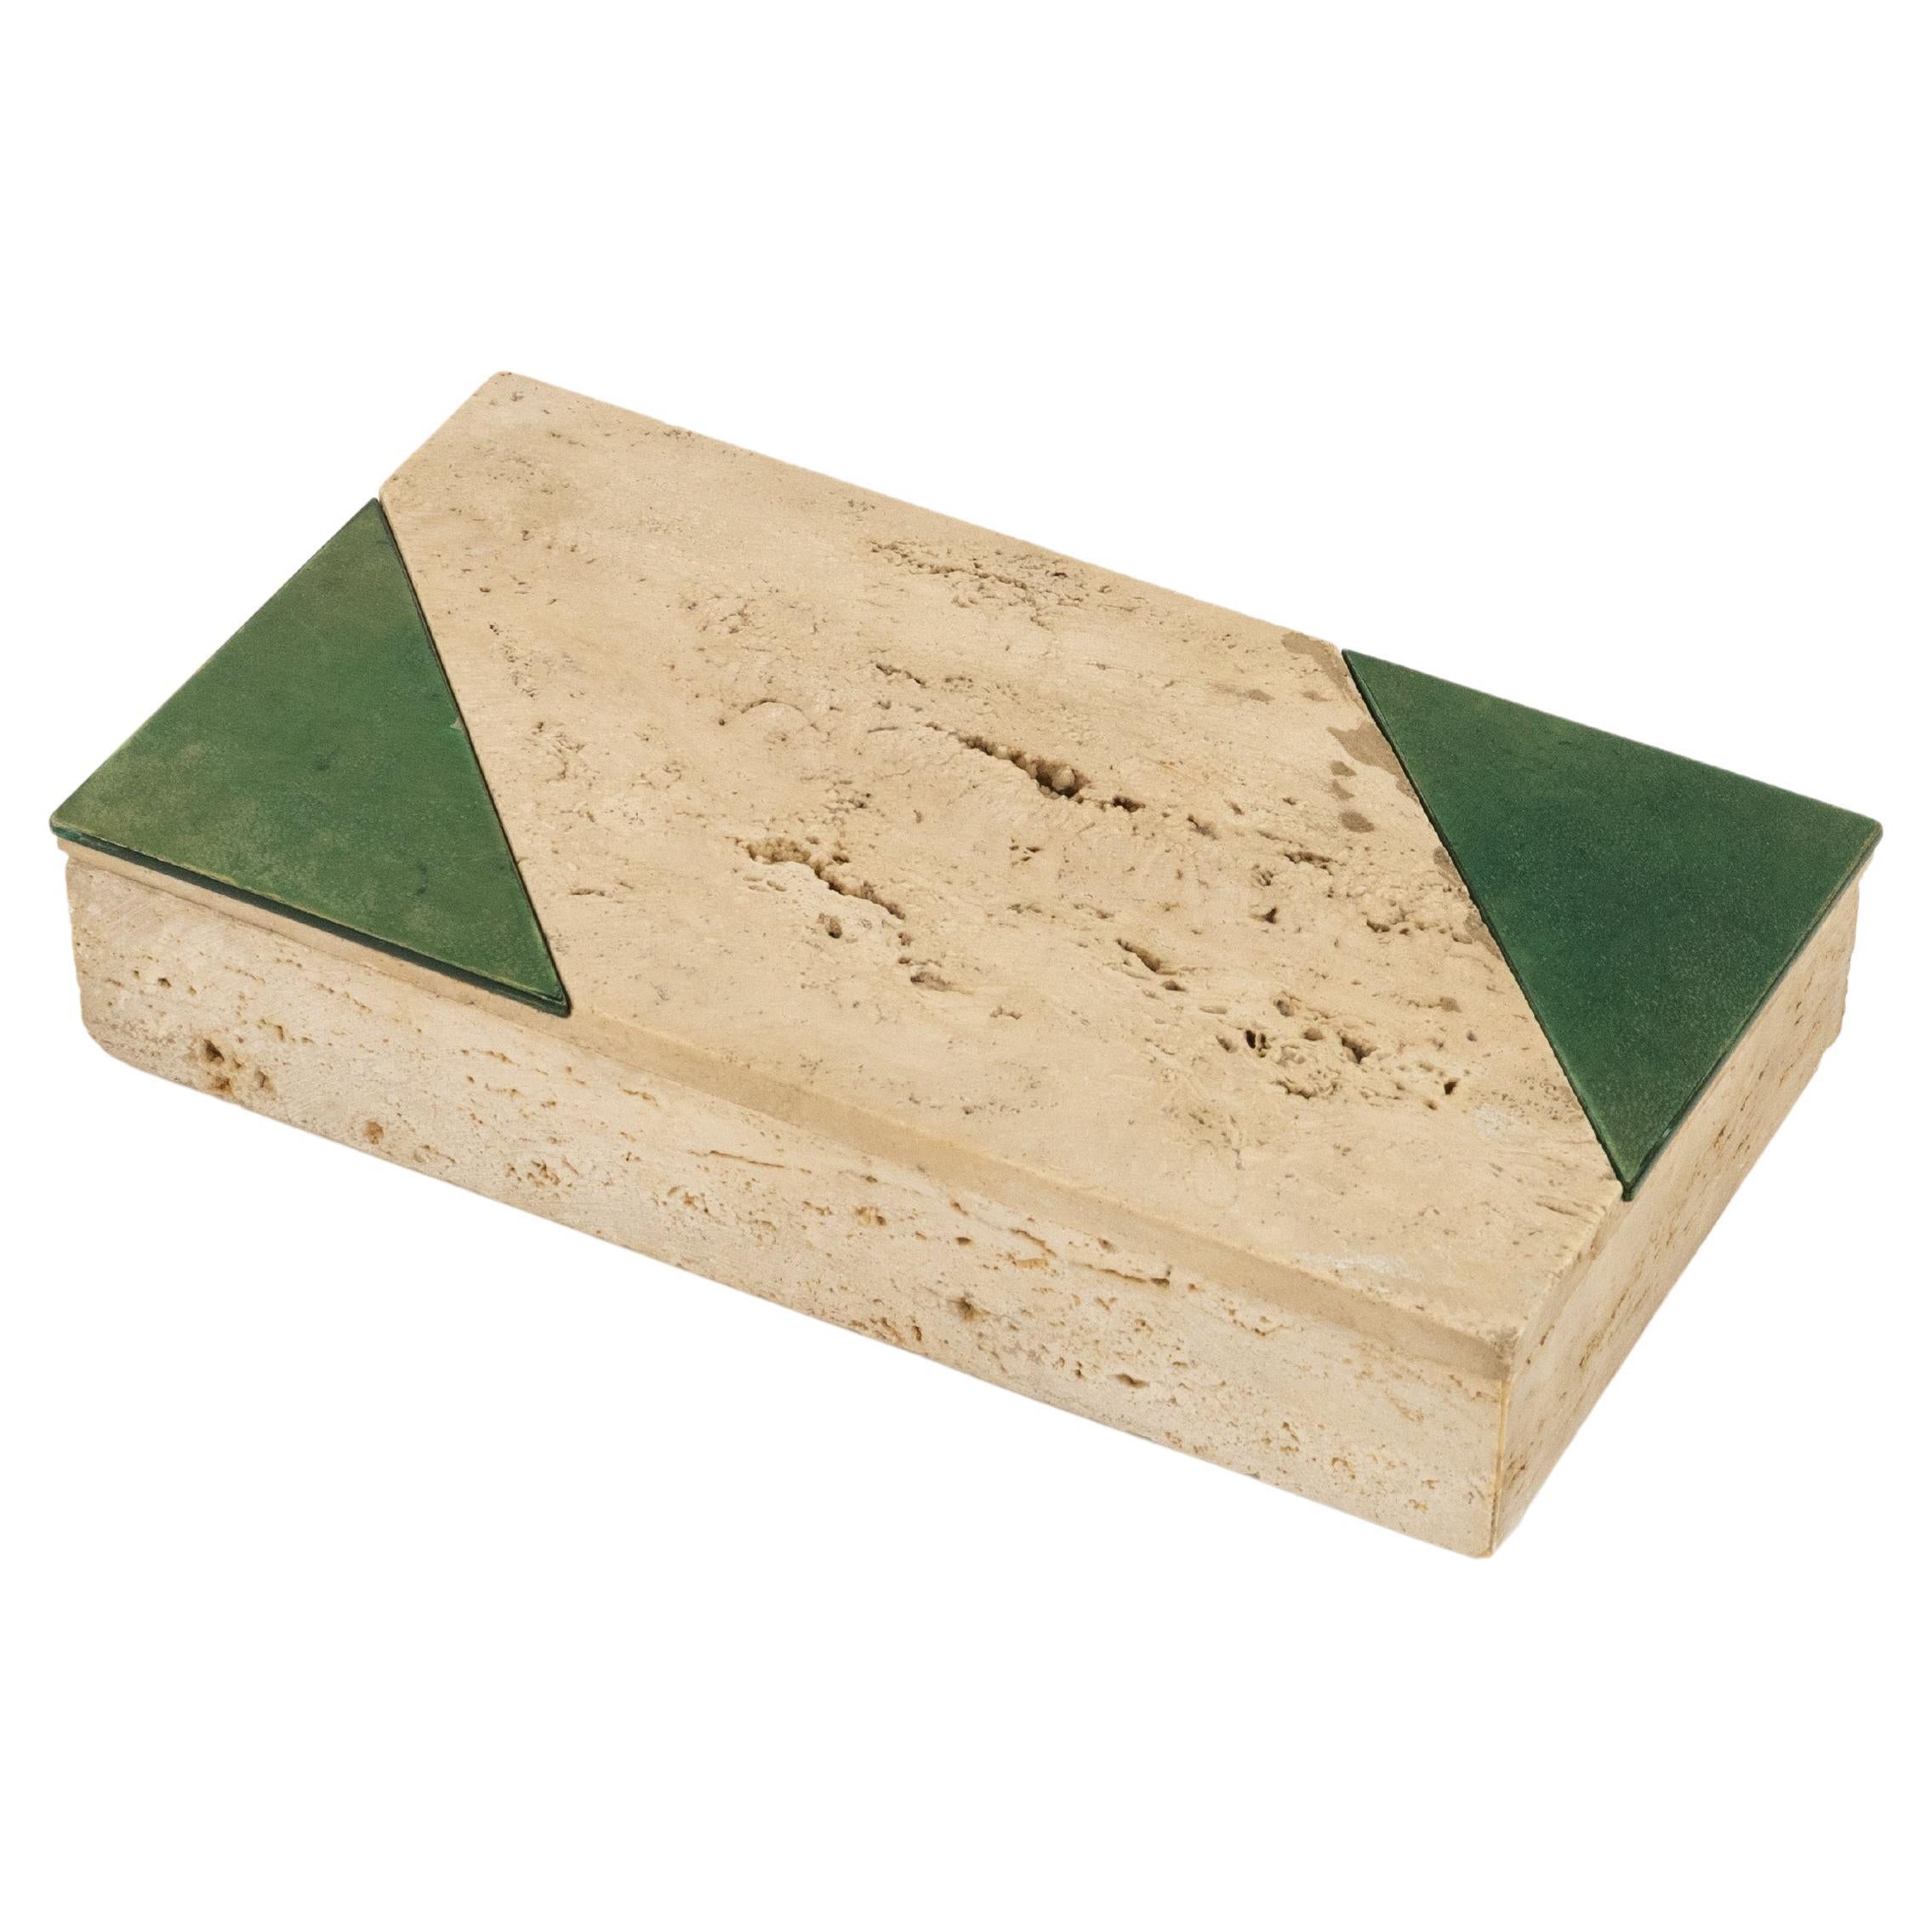 Rectangular Decorative Box in Travertine Fratelli Mannelli Style, Italy 1970s For Sale